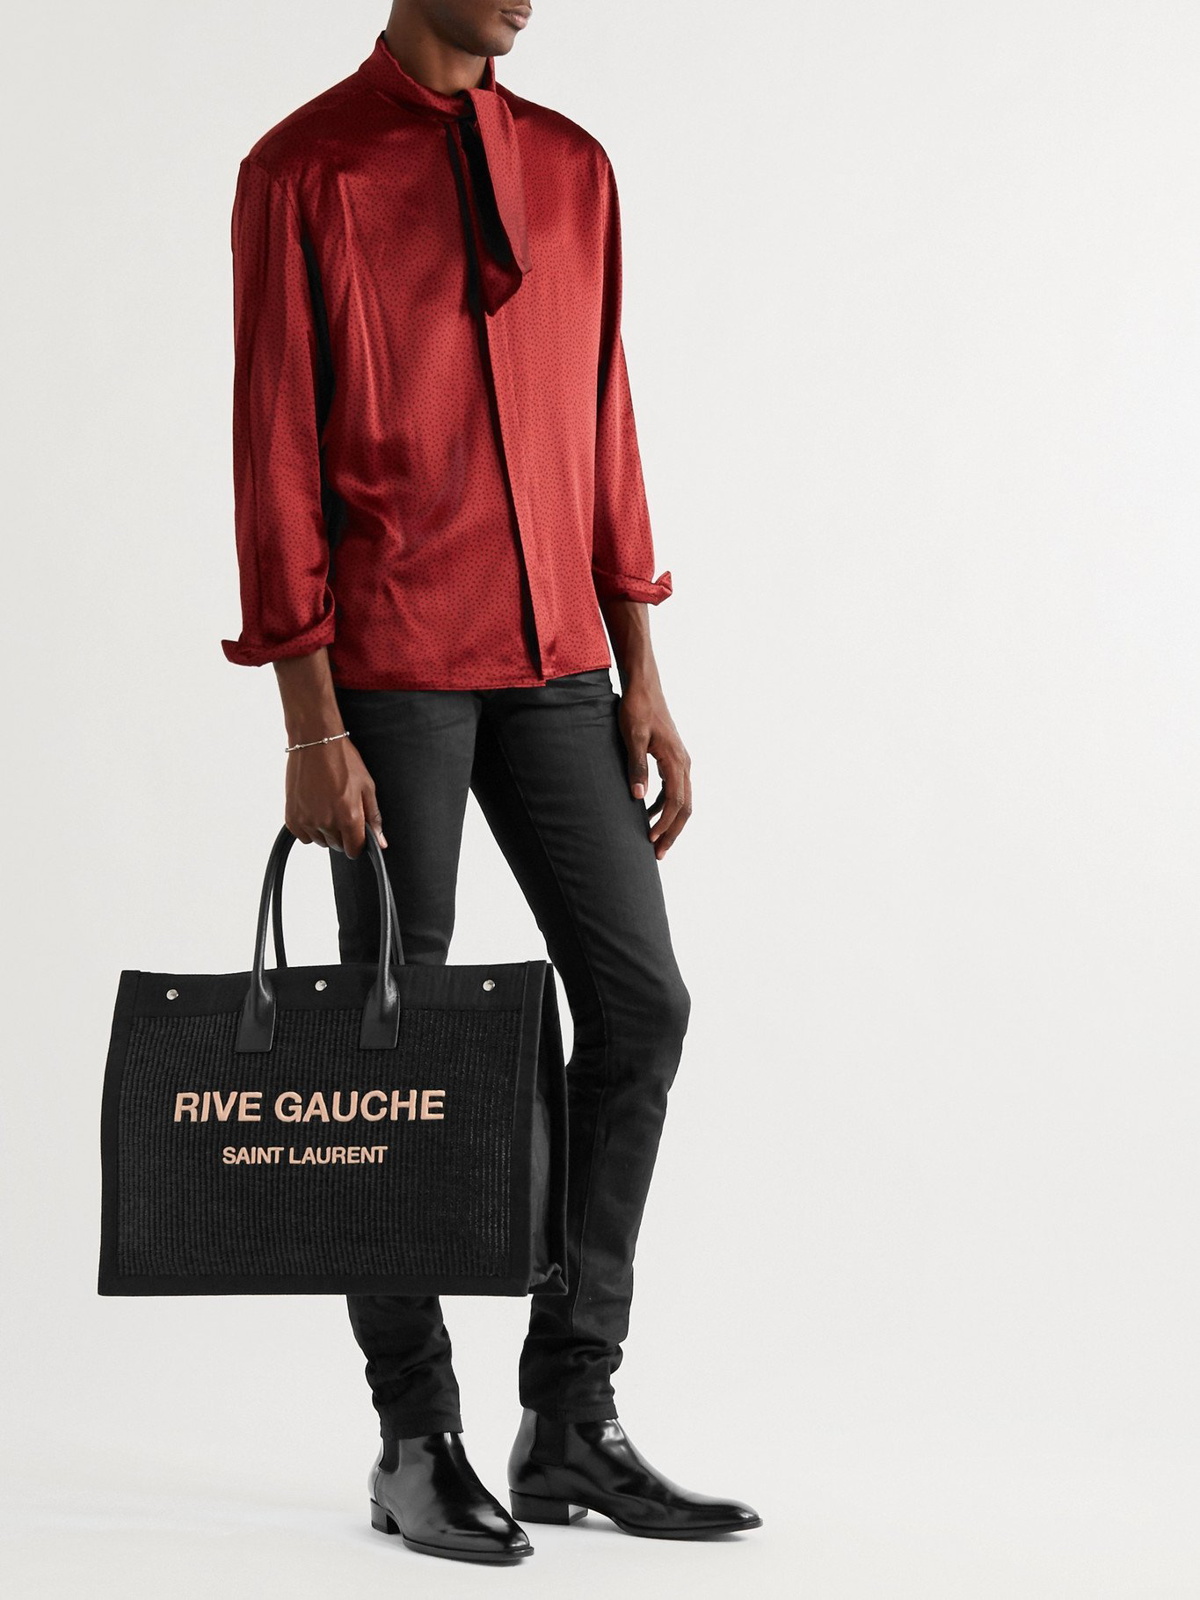 rive gauche large tote bag in printed canvas and leather